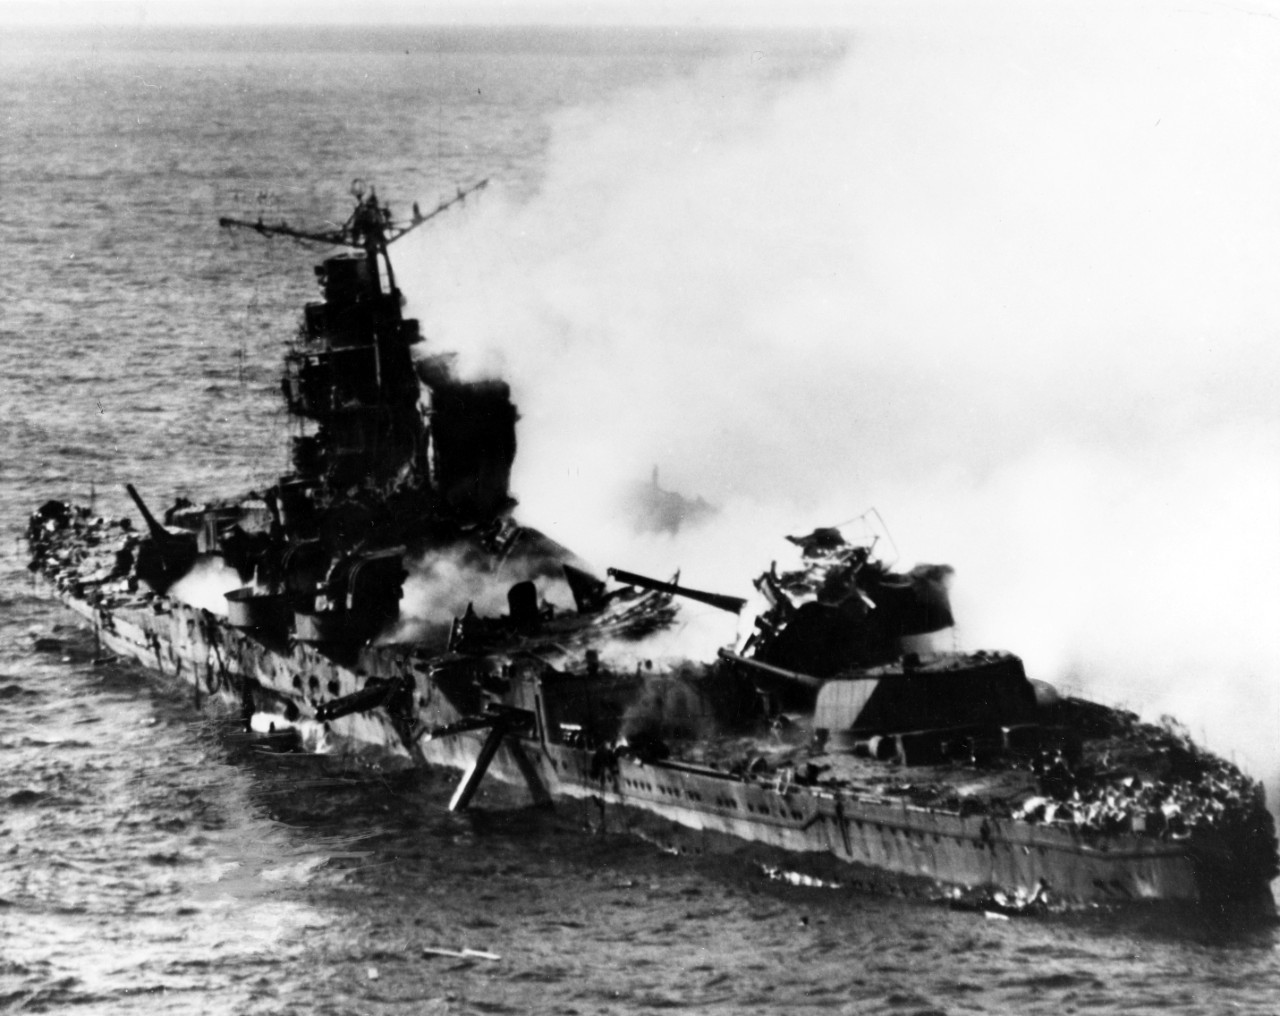 This close up picture shows the devastated ship in more detail. Her midships structure lies shattered, and both portside torpedo tubes are trained outboard. Parts of the aft superstructure, and possibly the mainmast, collapse across her No. 4 8-inch gun turret — the wreckage does not comprise Capt. Fleming’s Vindicator, which crashes into the sea. (U.S. Navy Photograph 80-G-414422, National Archives and Records Administration, Still Pictures Section, College Park, Md.)